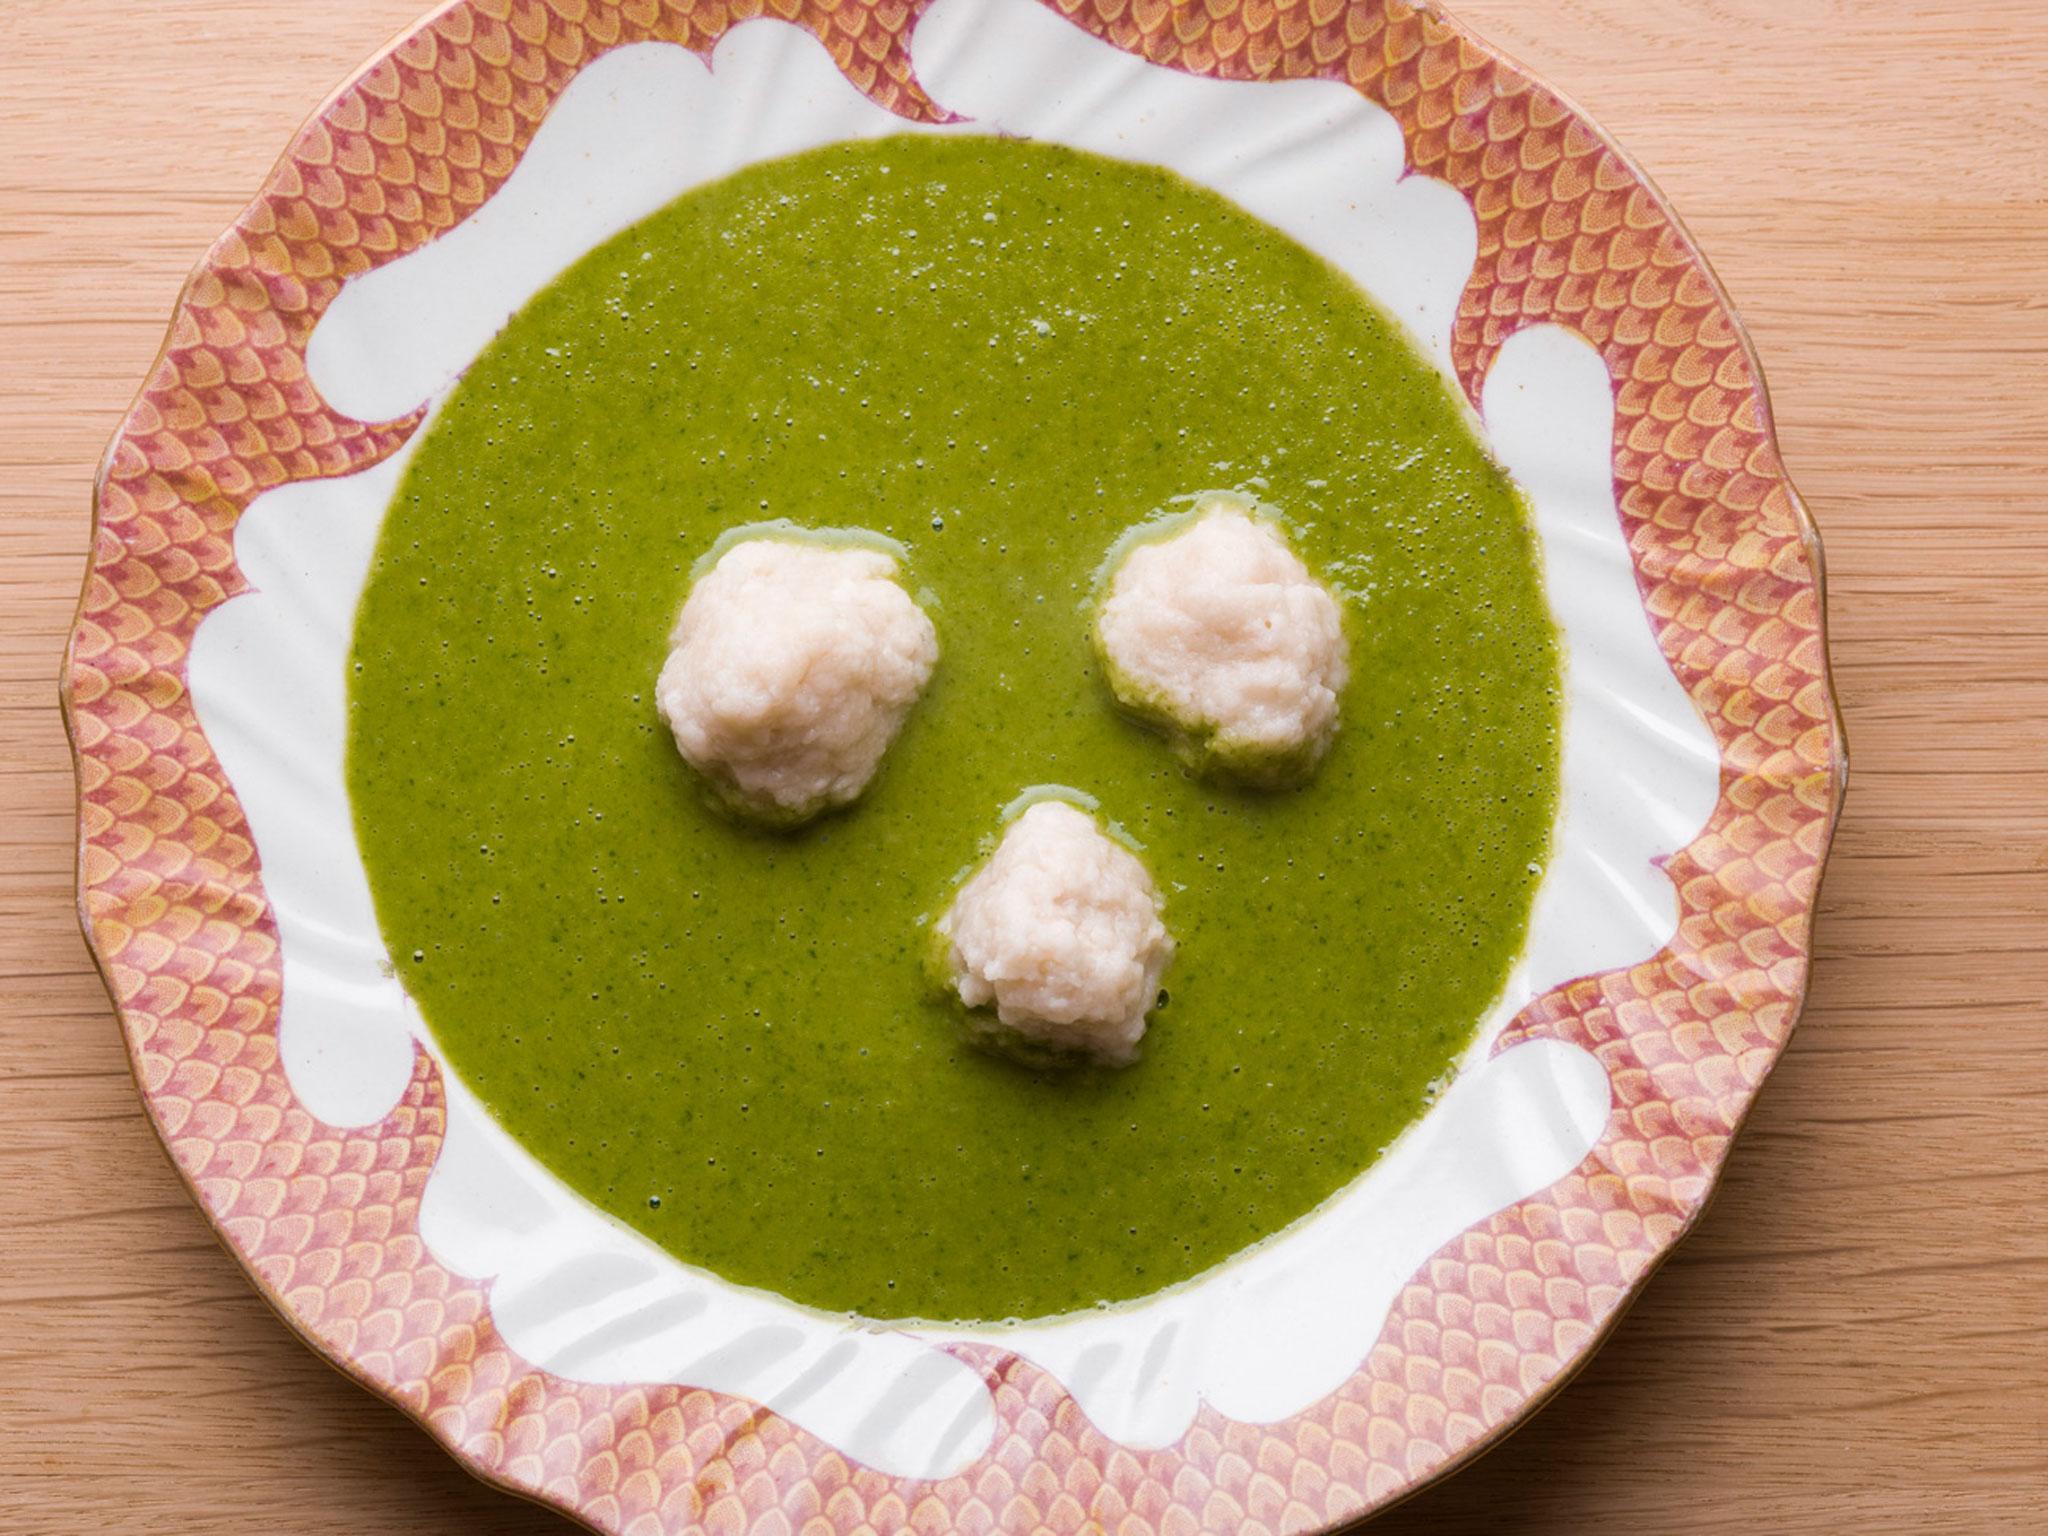 Herb soup with parmesan dumplings, a great way to use up green herbs that are past their best